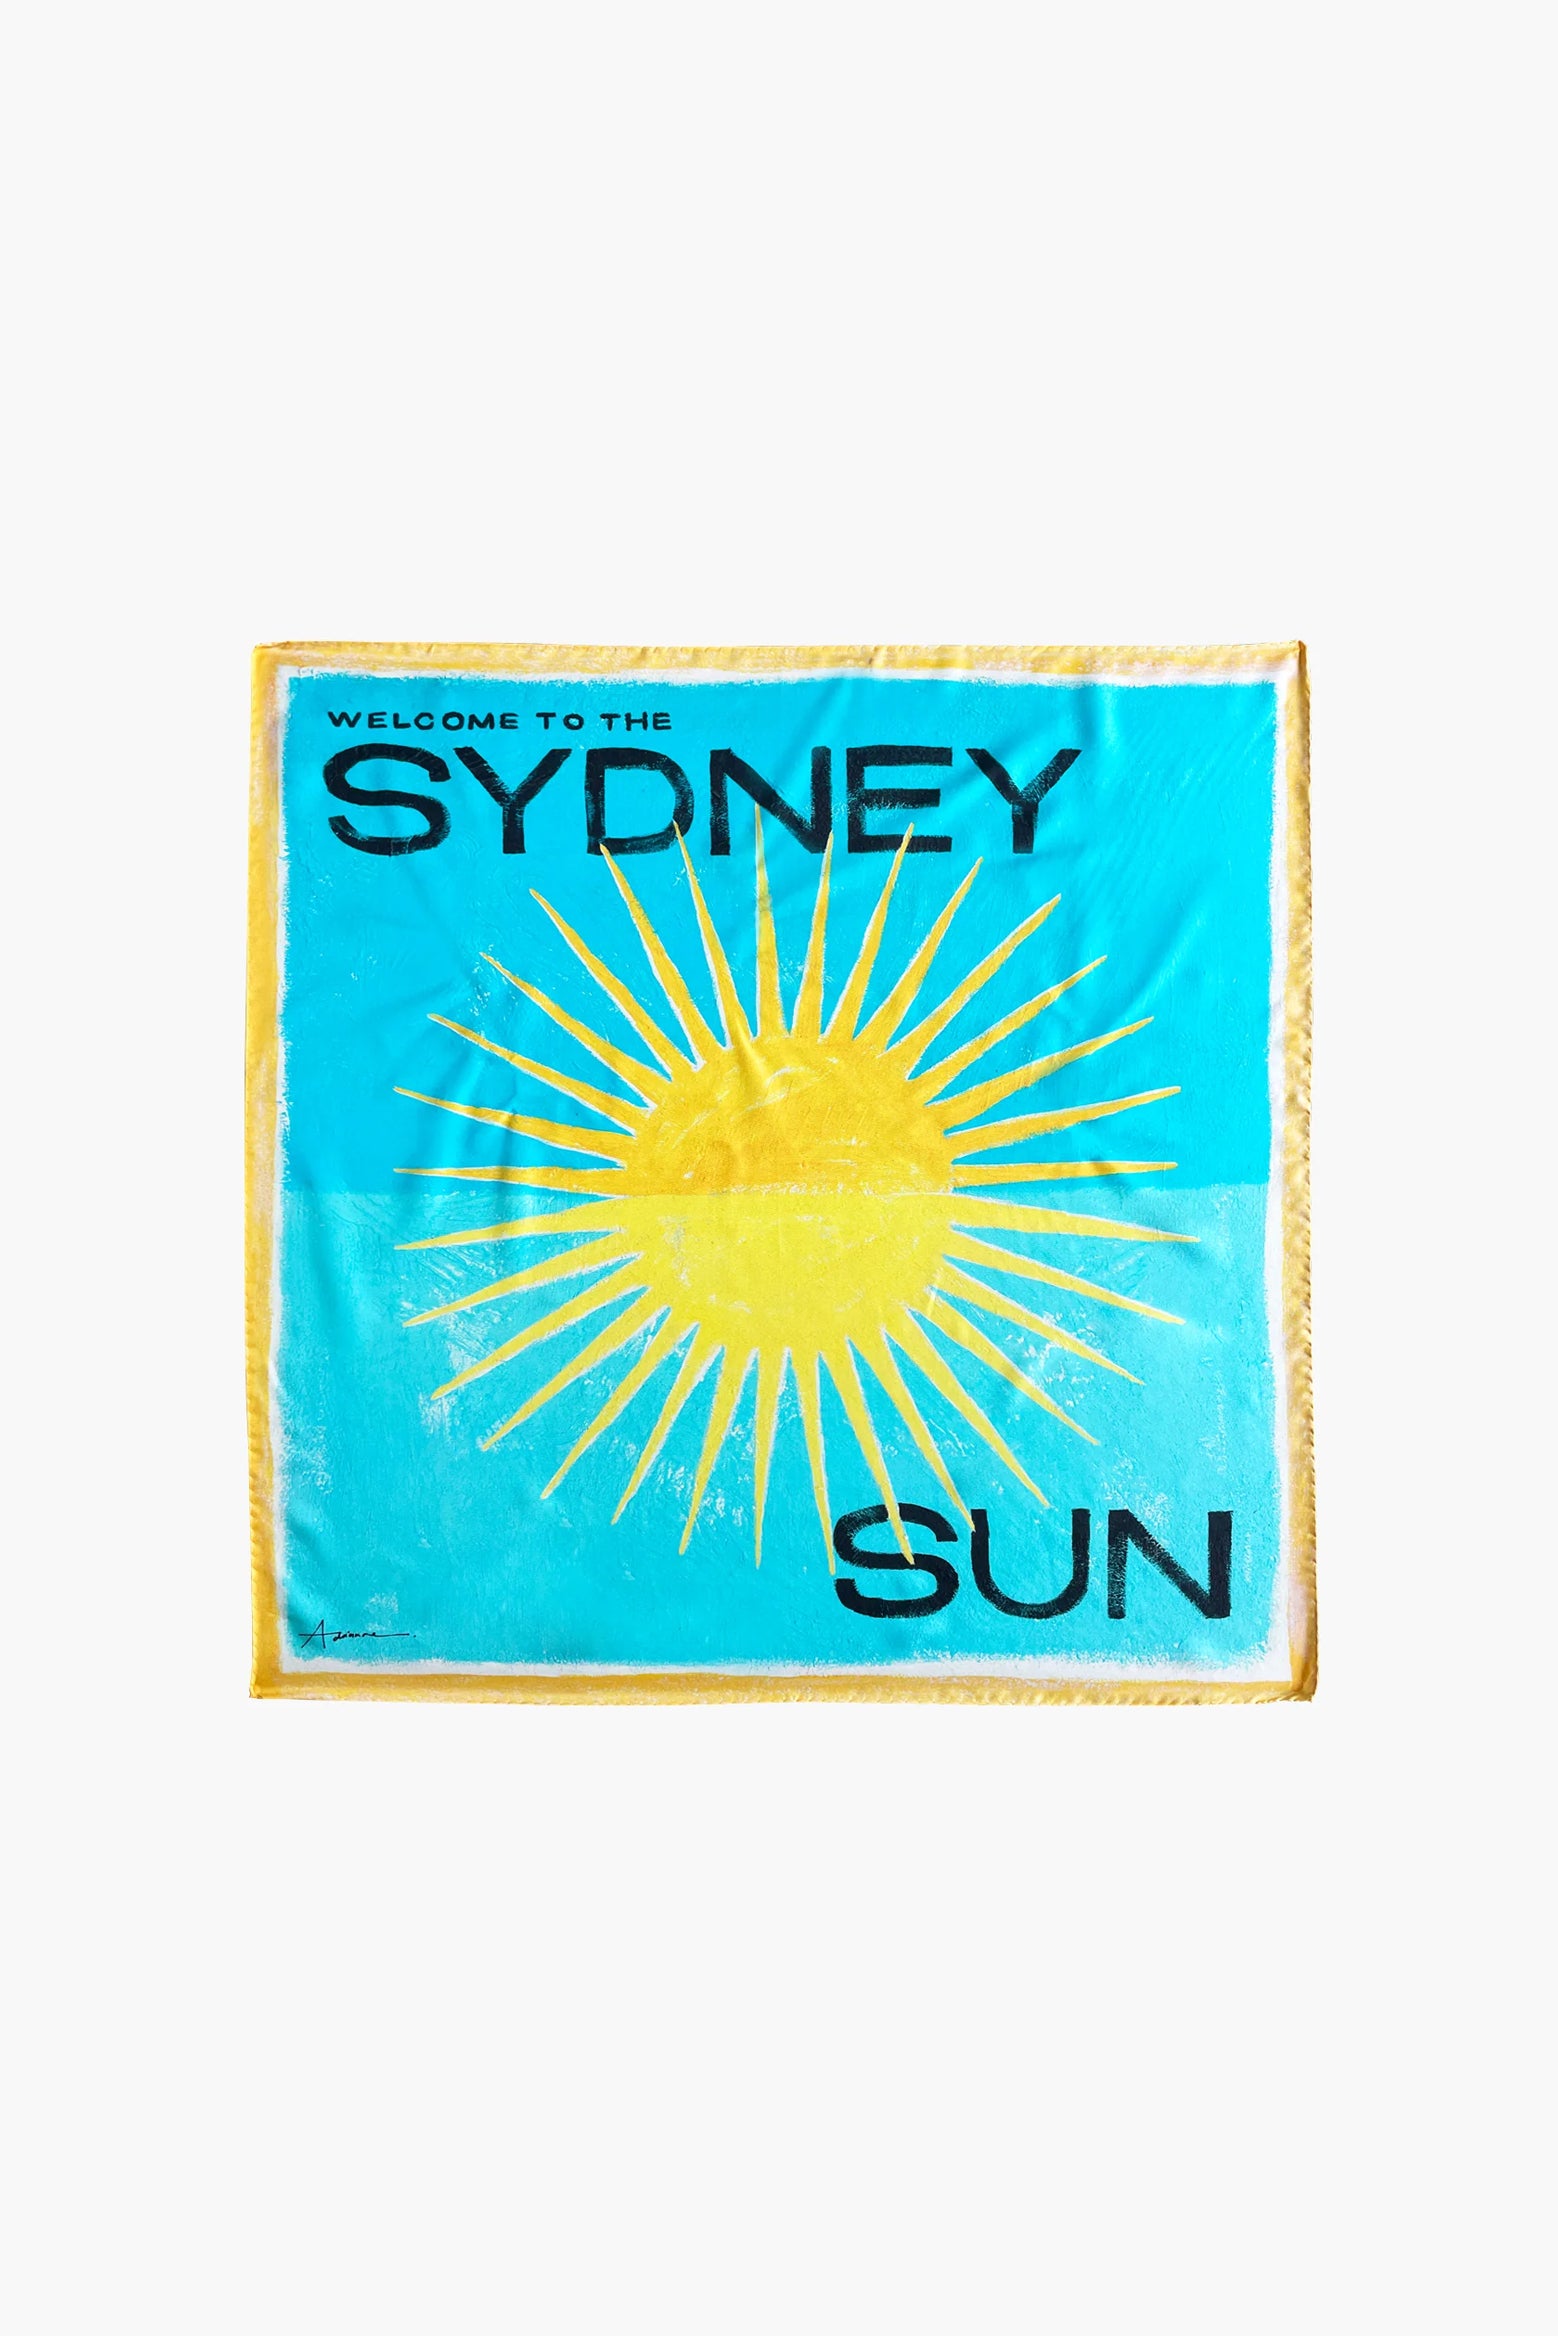 Atlas Silk Travel Scarf in Sydney Sun available at The New Trend Australia.